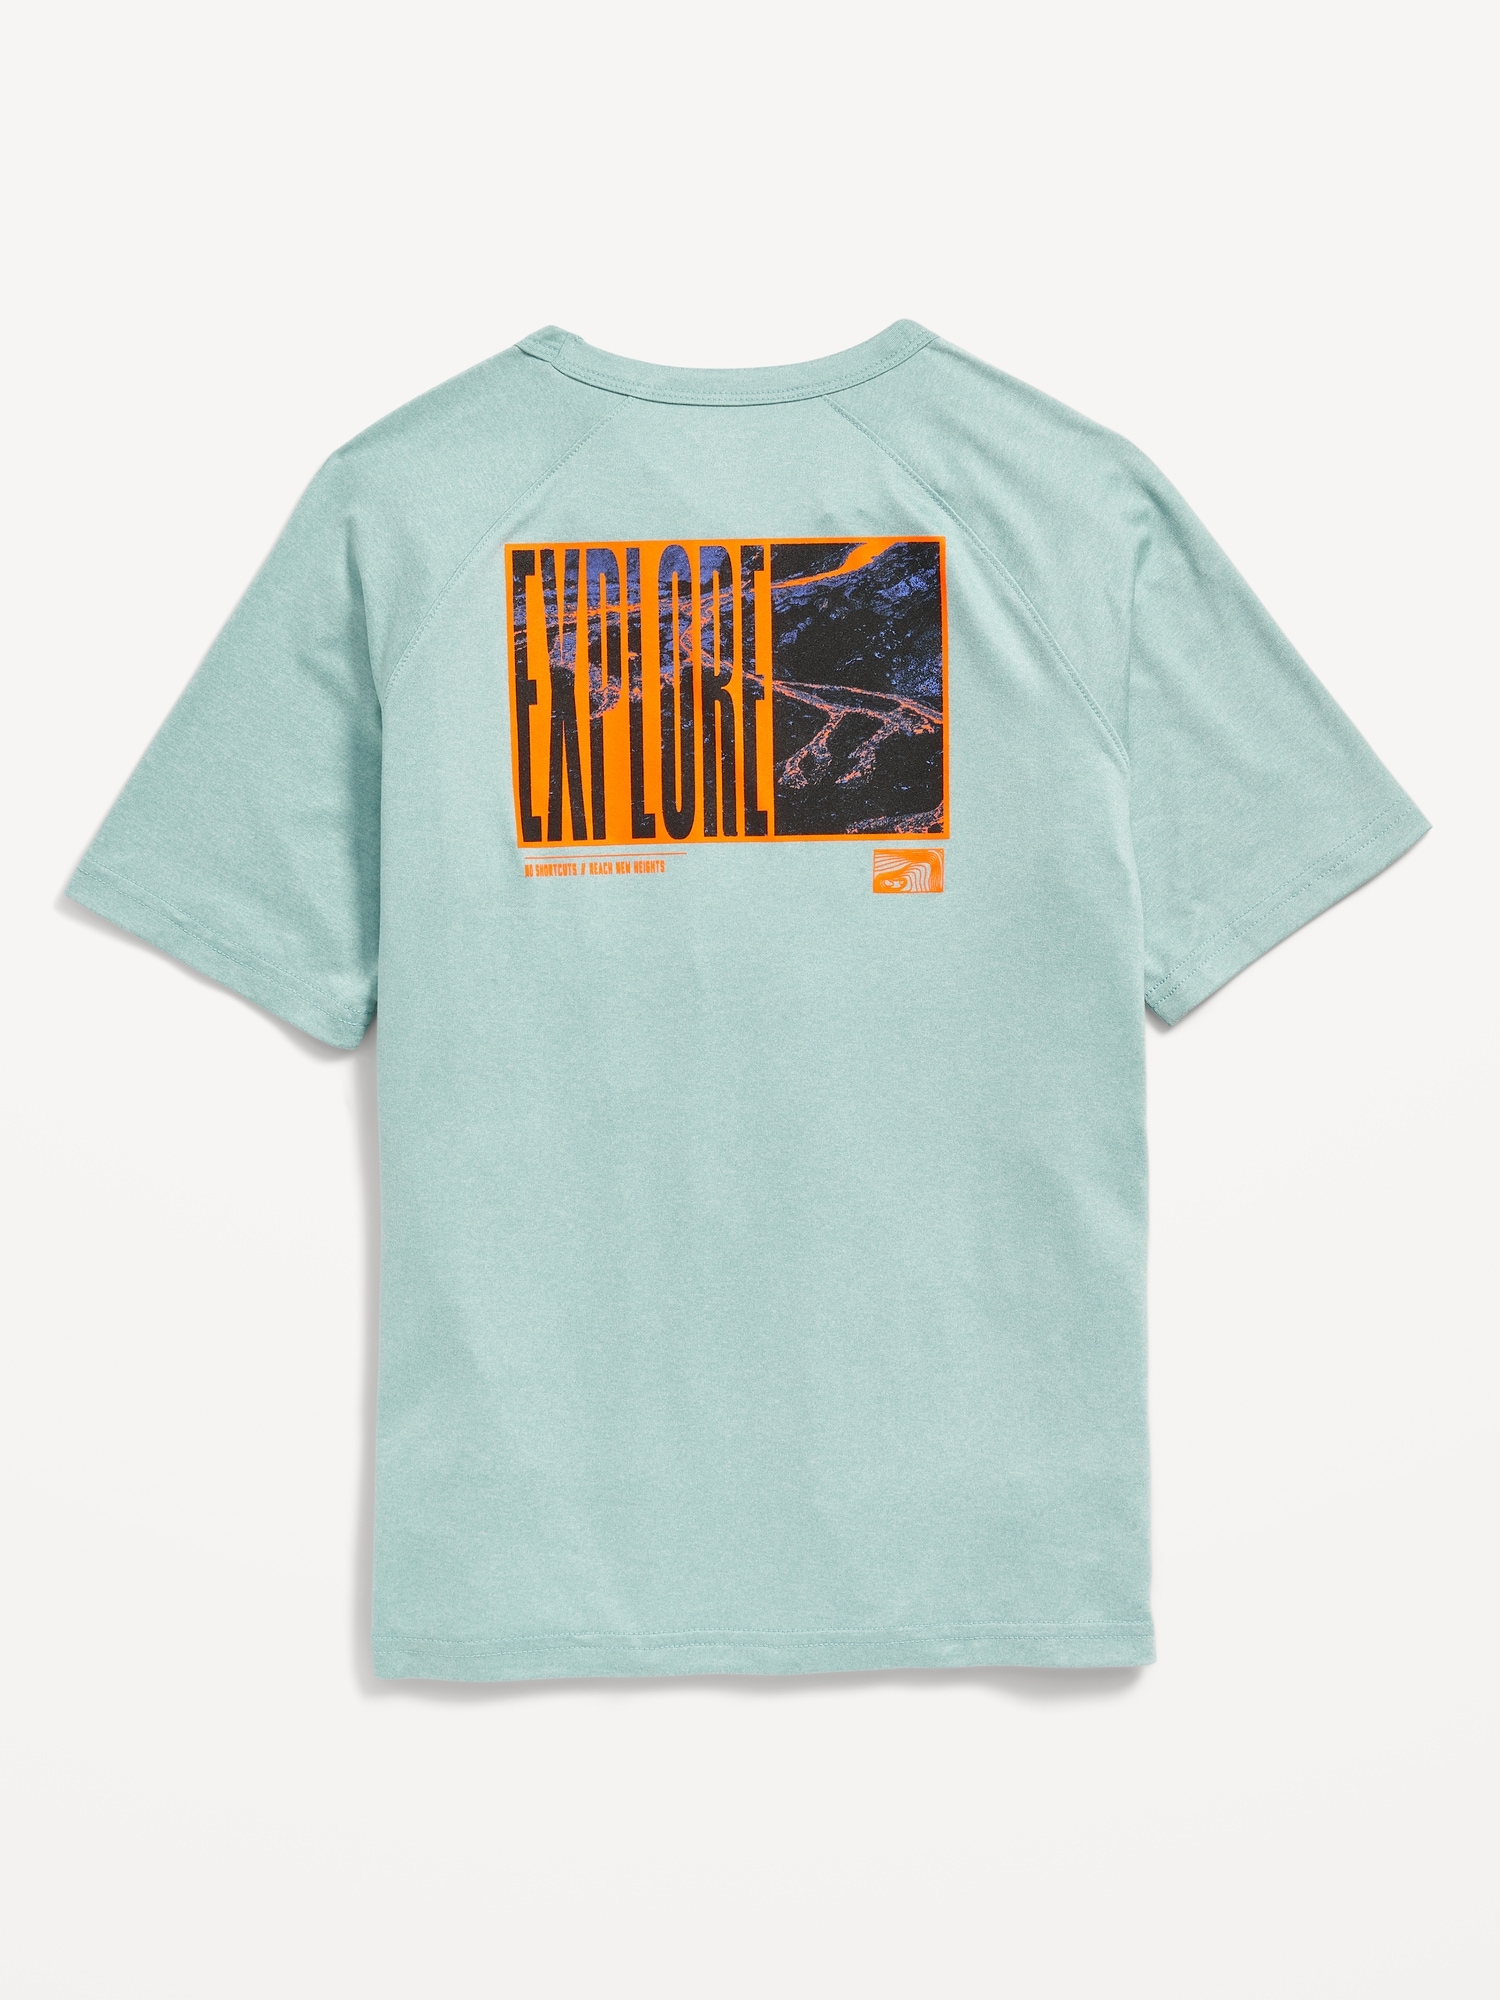 Cloud 94 Soft Go-Dry Cool Graphic Performance T-Shirt for Boys